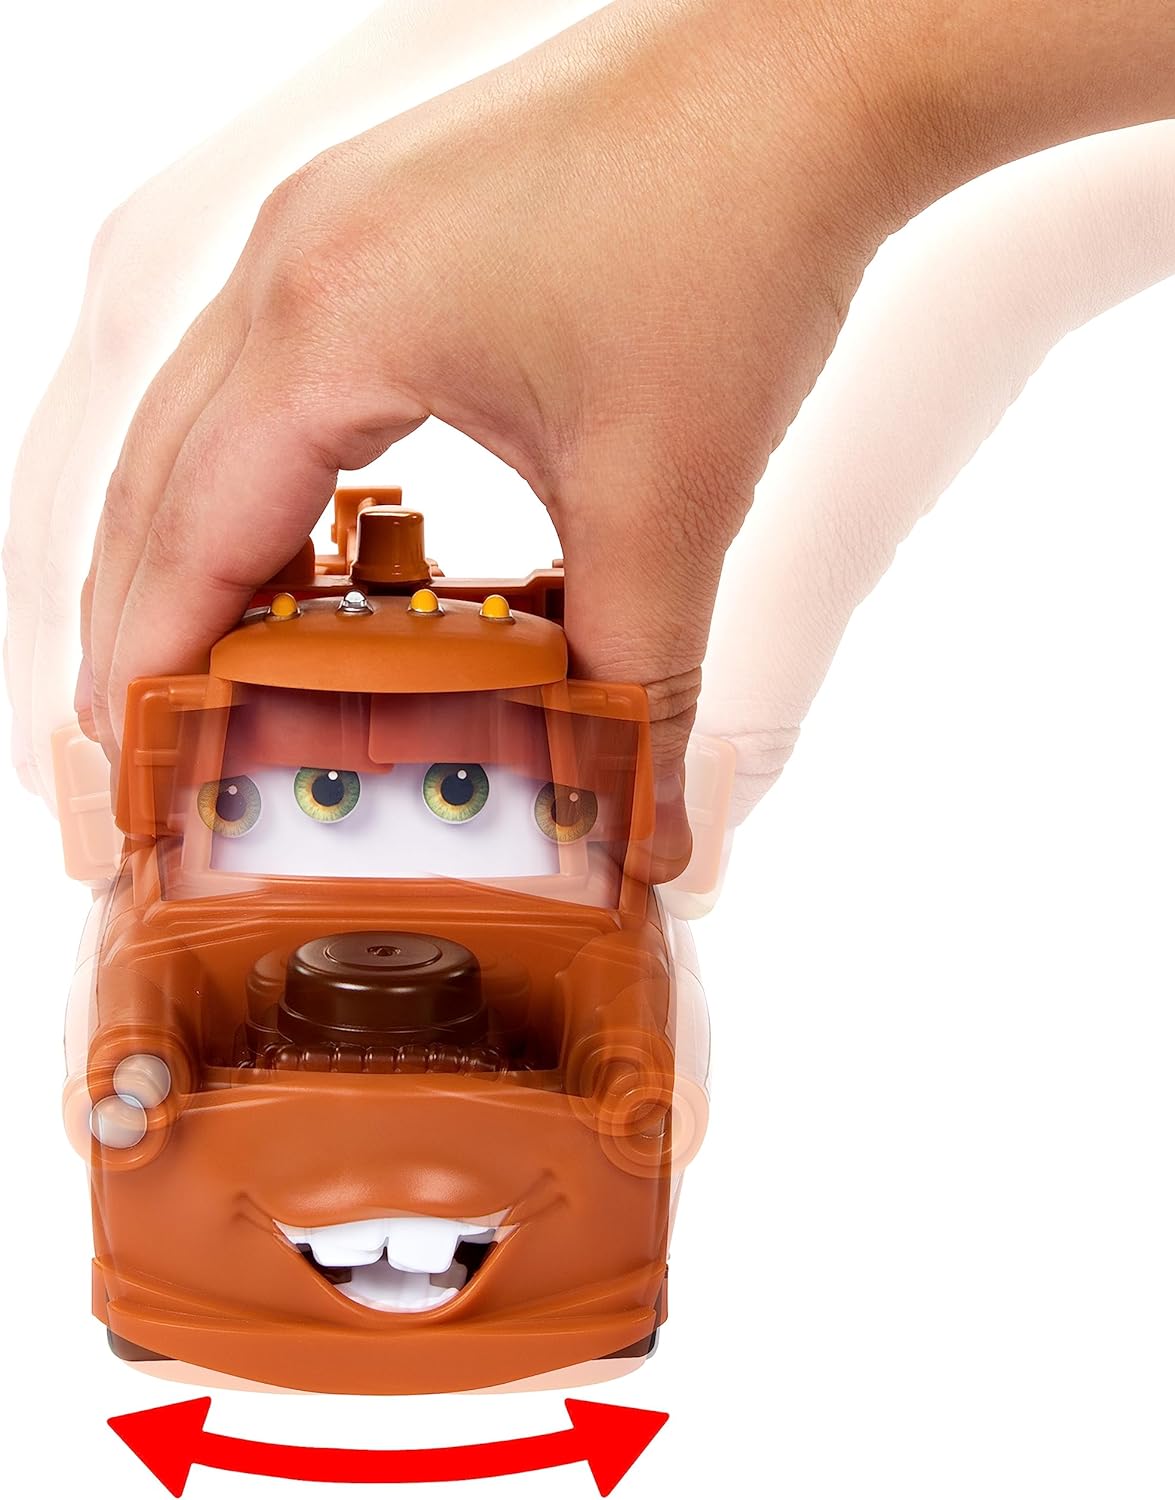 Mattel Disney Pixar Cars Toy Cars & Trucks, Moving Moments Mater Vehicle with Moving Eyes & Mouth (Amazon Exclusive)